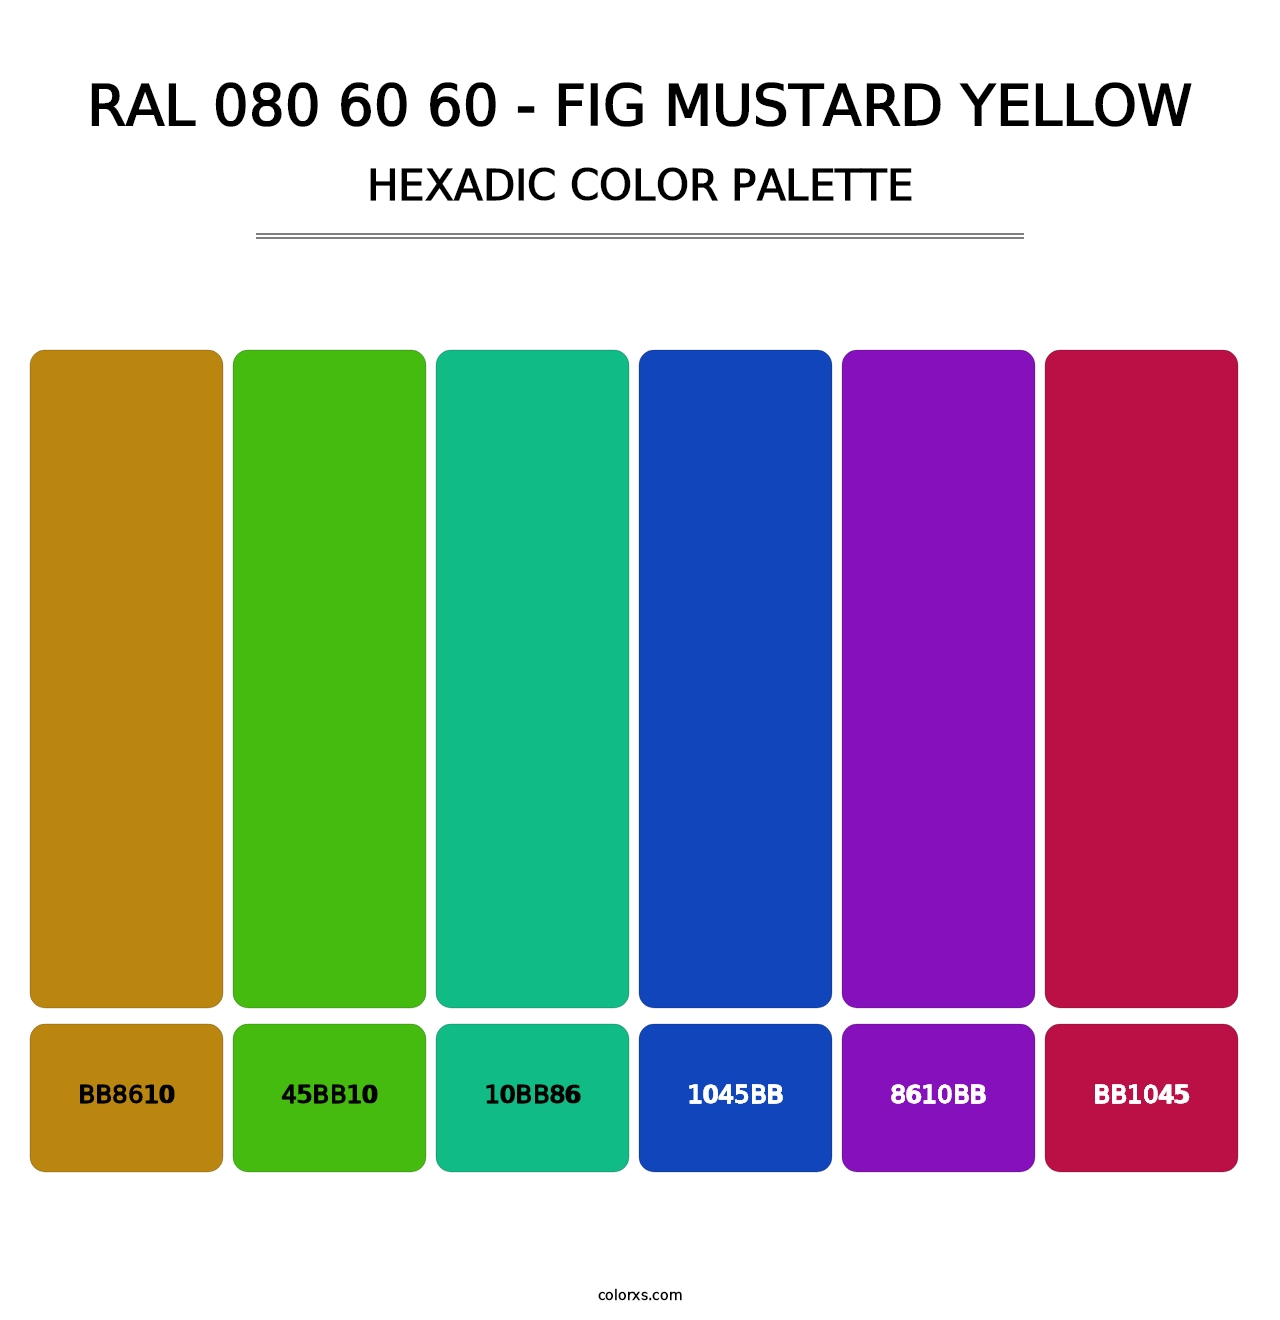 RAL 080 60 60 - Fig Mustard Yellow - Hexadic Color Palette